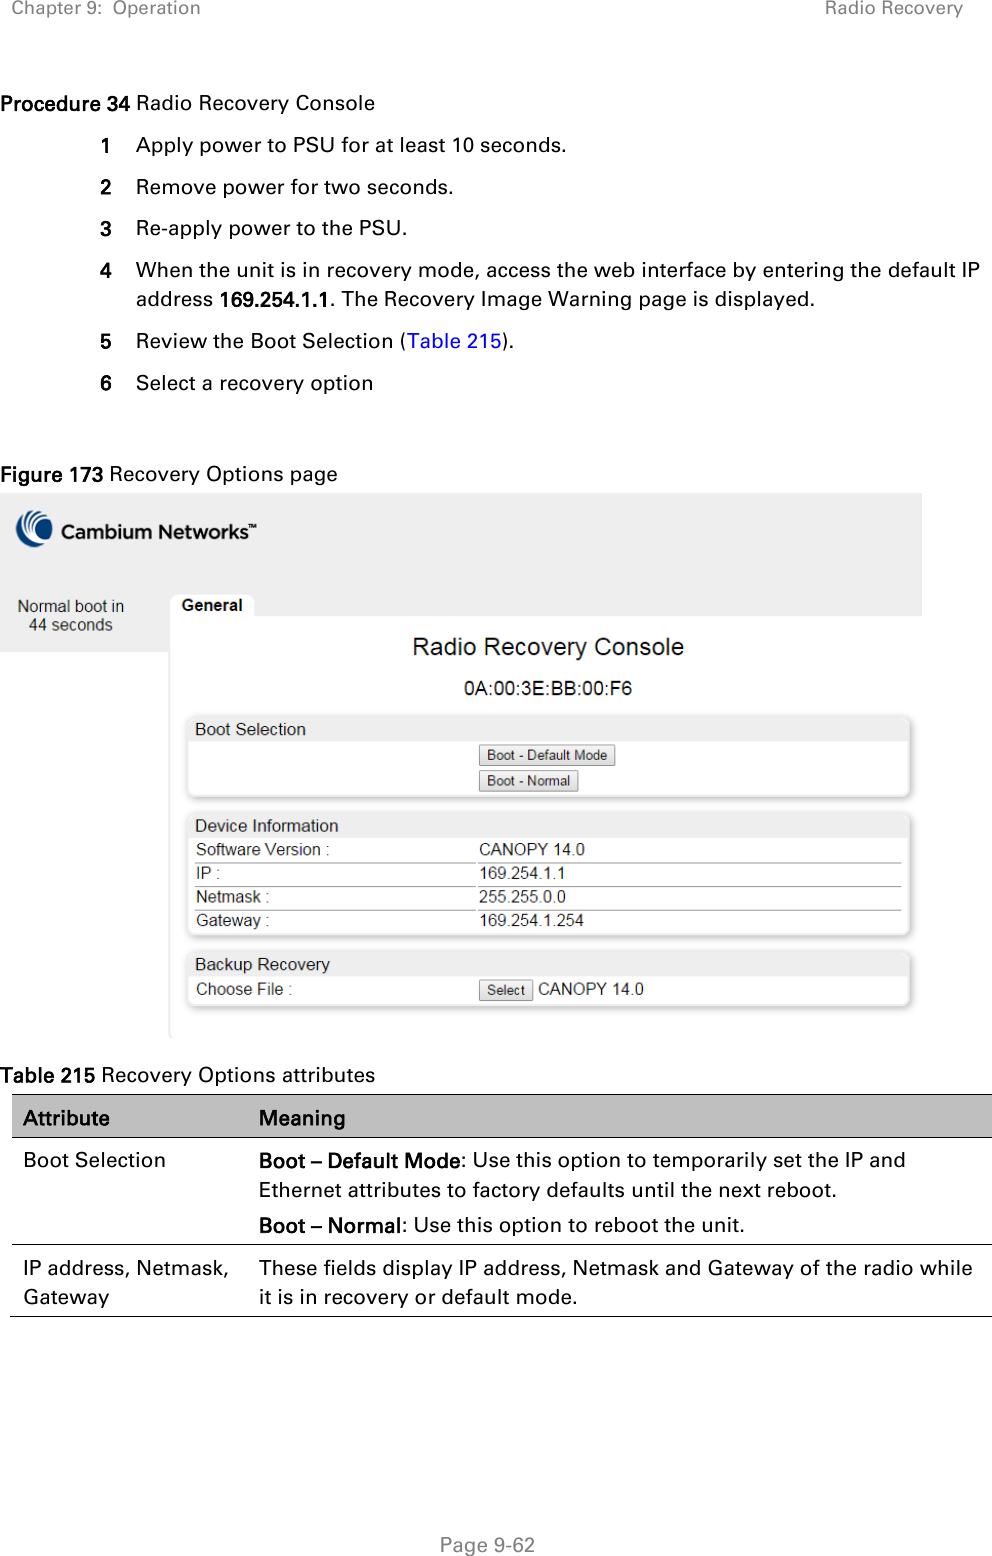 Chapter 9:  Operation Radio Recovery   Page 9-62 Procedure 34 Radio Recovery Console 1 Apply power to PSU for at least 10 seconds. 2 Remove power for two seconds. 3 Re-apply power to the PSU. 4 When the unit is in recovery mode, access the web interface by entering the default IP address 169.254.1.1. The Recovery Image Warning page is displayed. 5 Review the Boot Selection (Table 215). 6 Select a recovery option  Figure 173 Recovery Options page  Table 215 Recovery Options attributes Attribute Meaning Boot Selection Boot – Default Mode: Use this option to temporarily set the IP and Ethernet attributes to factory defaults until the next reboot. Boot – Normal: Use this option to reboot the unit. IP address, Netmask, Gateway These fields display IP address, Netmask and Gateway of the radio while it is in recovery or default mode. 